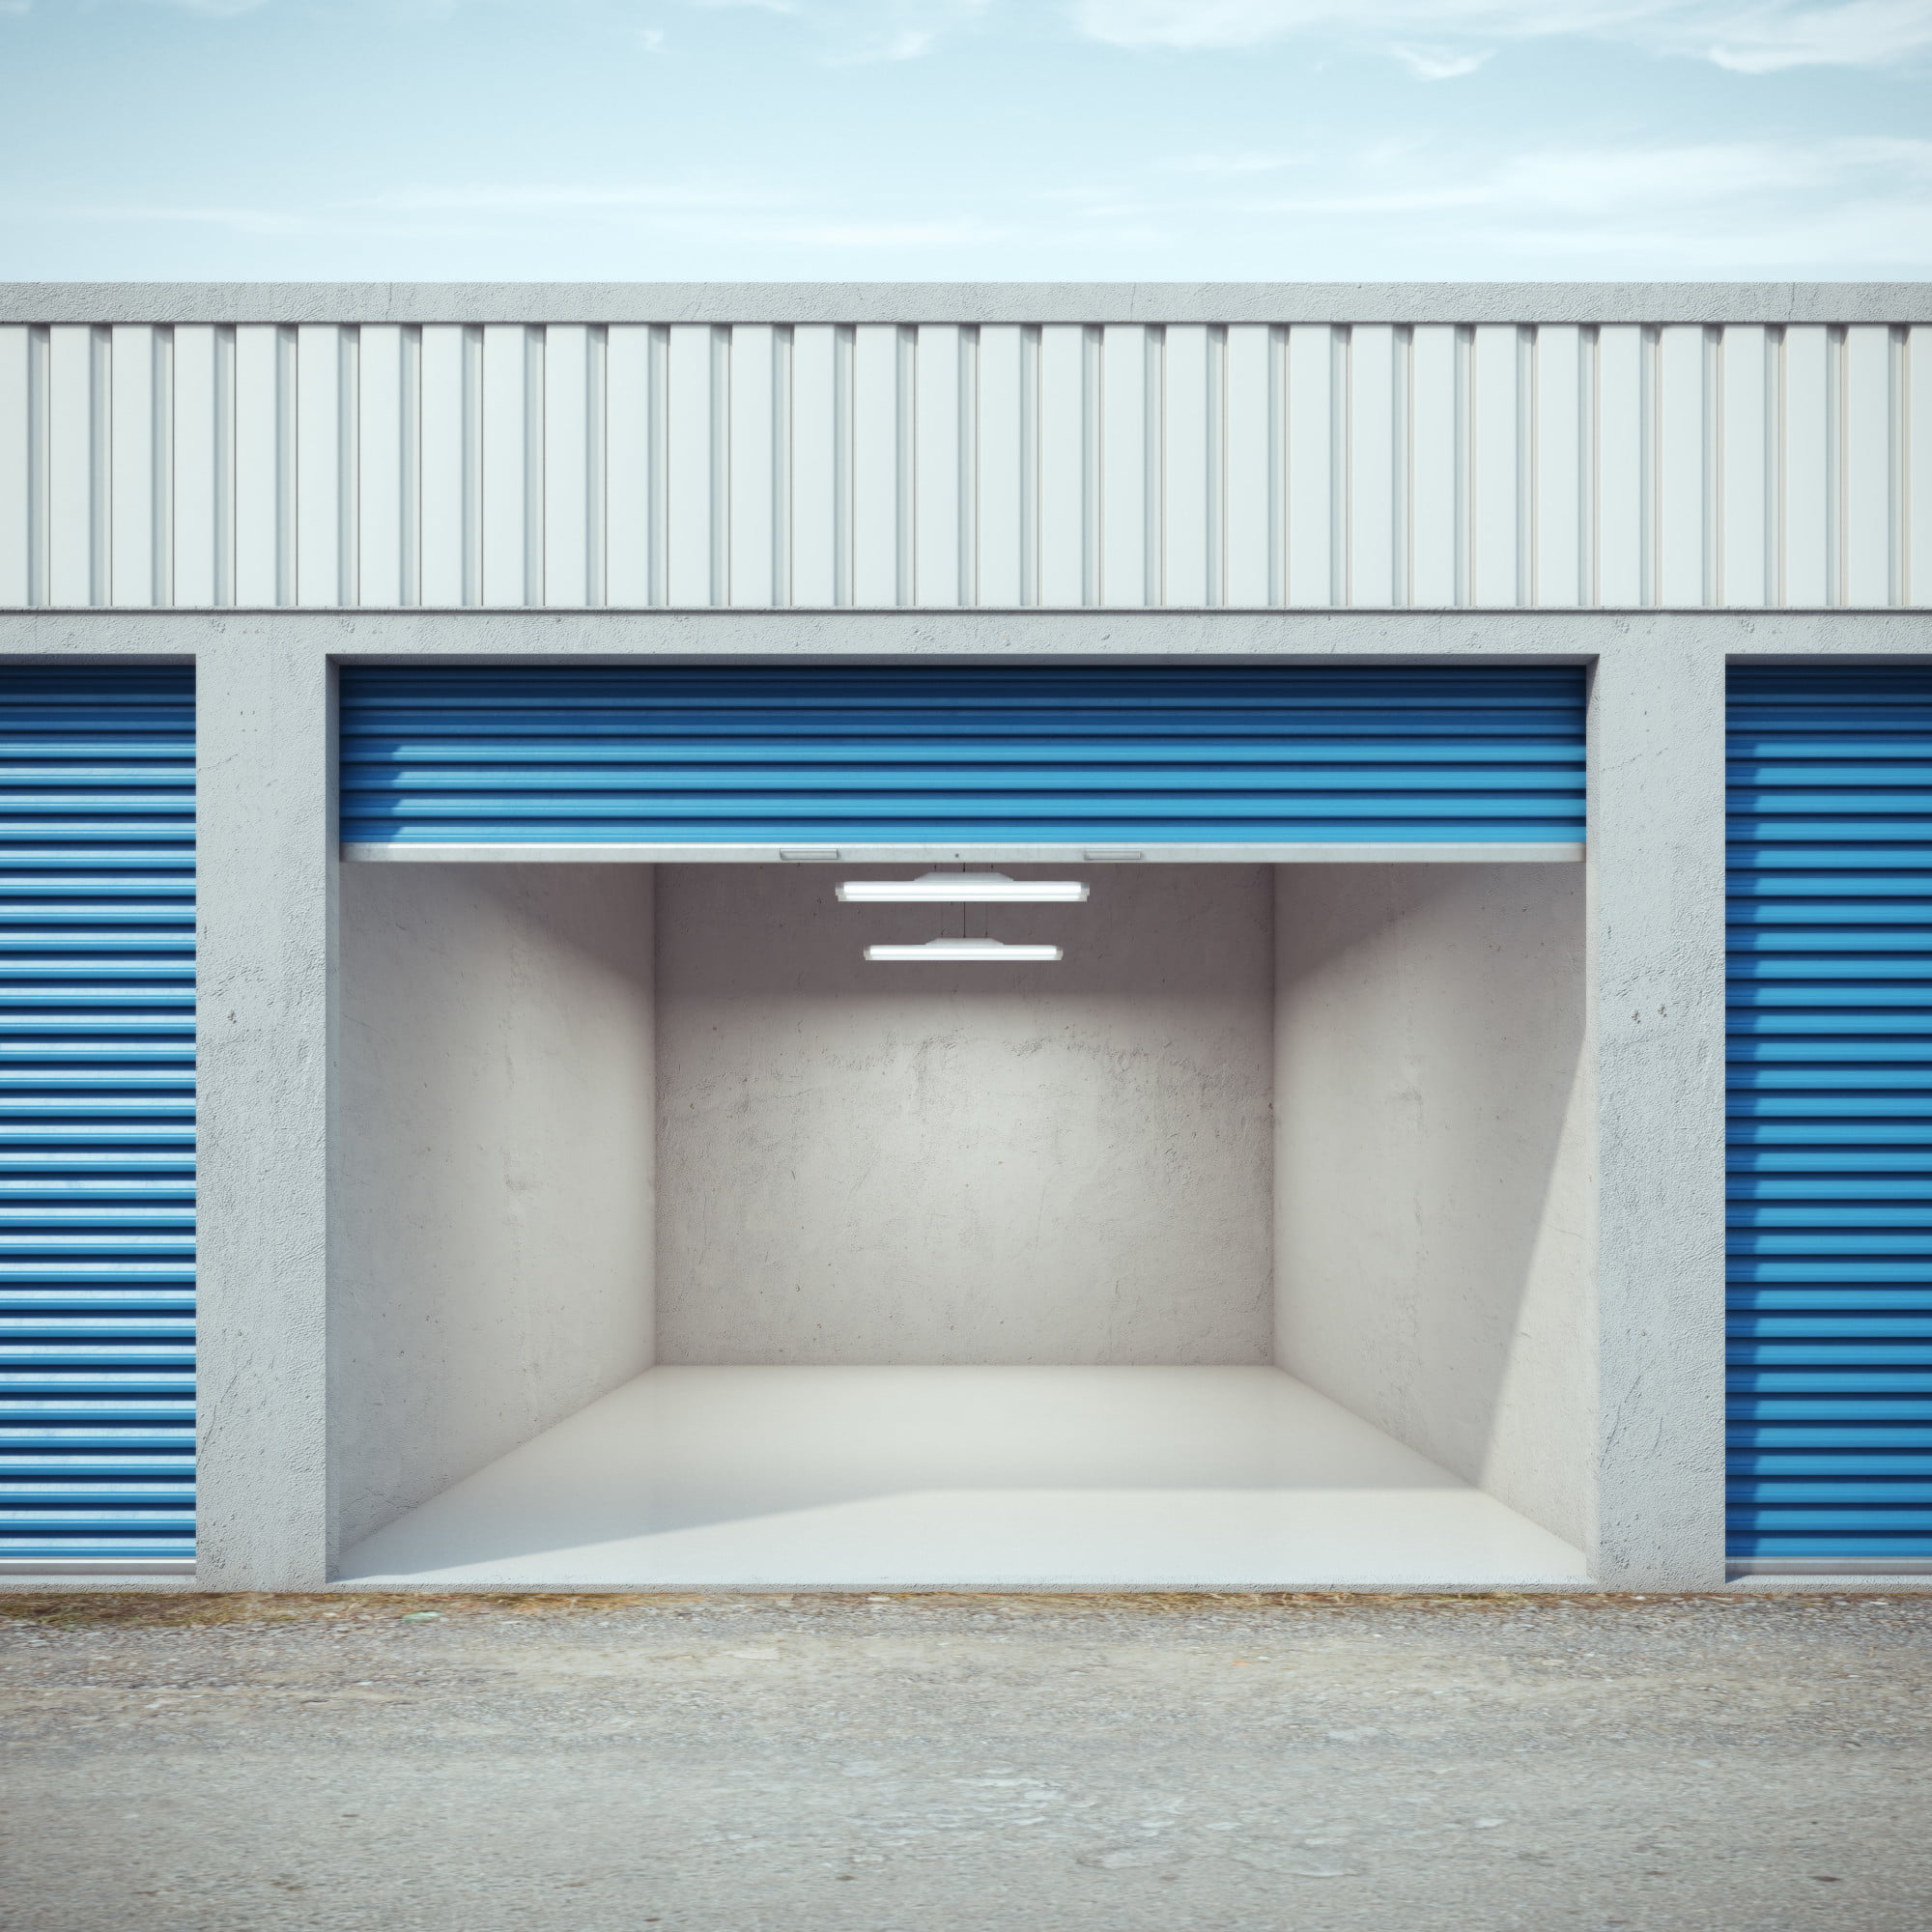 If you don't have room in your garage for your car or motorcycle, consider vehicle storage units. Learn the benefits of them here.